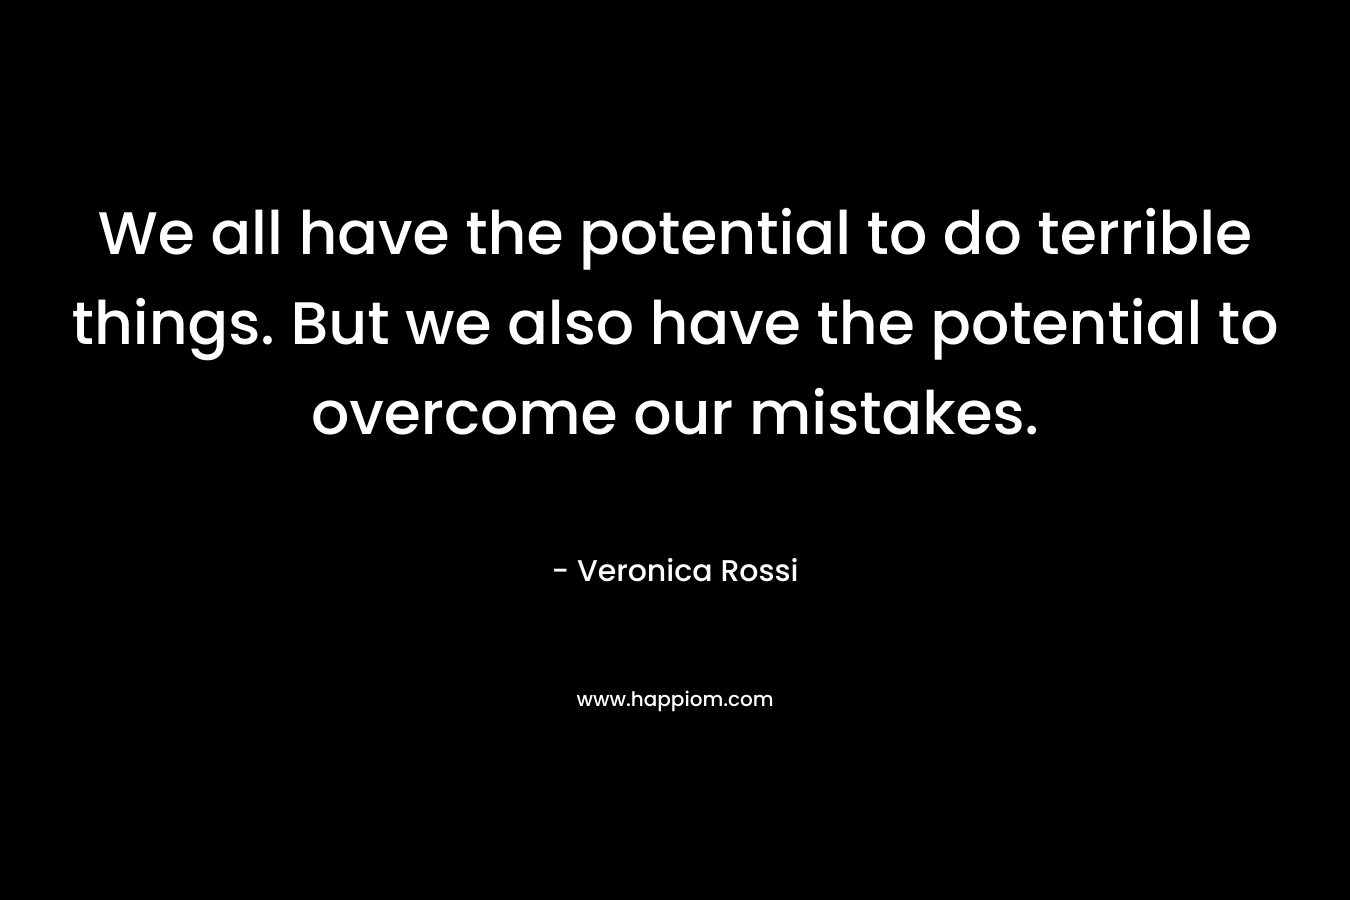 We all have the potential to do terrible things. But we also have the potential to overcome our mistakes.